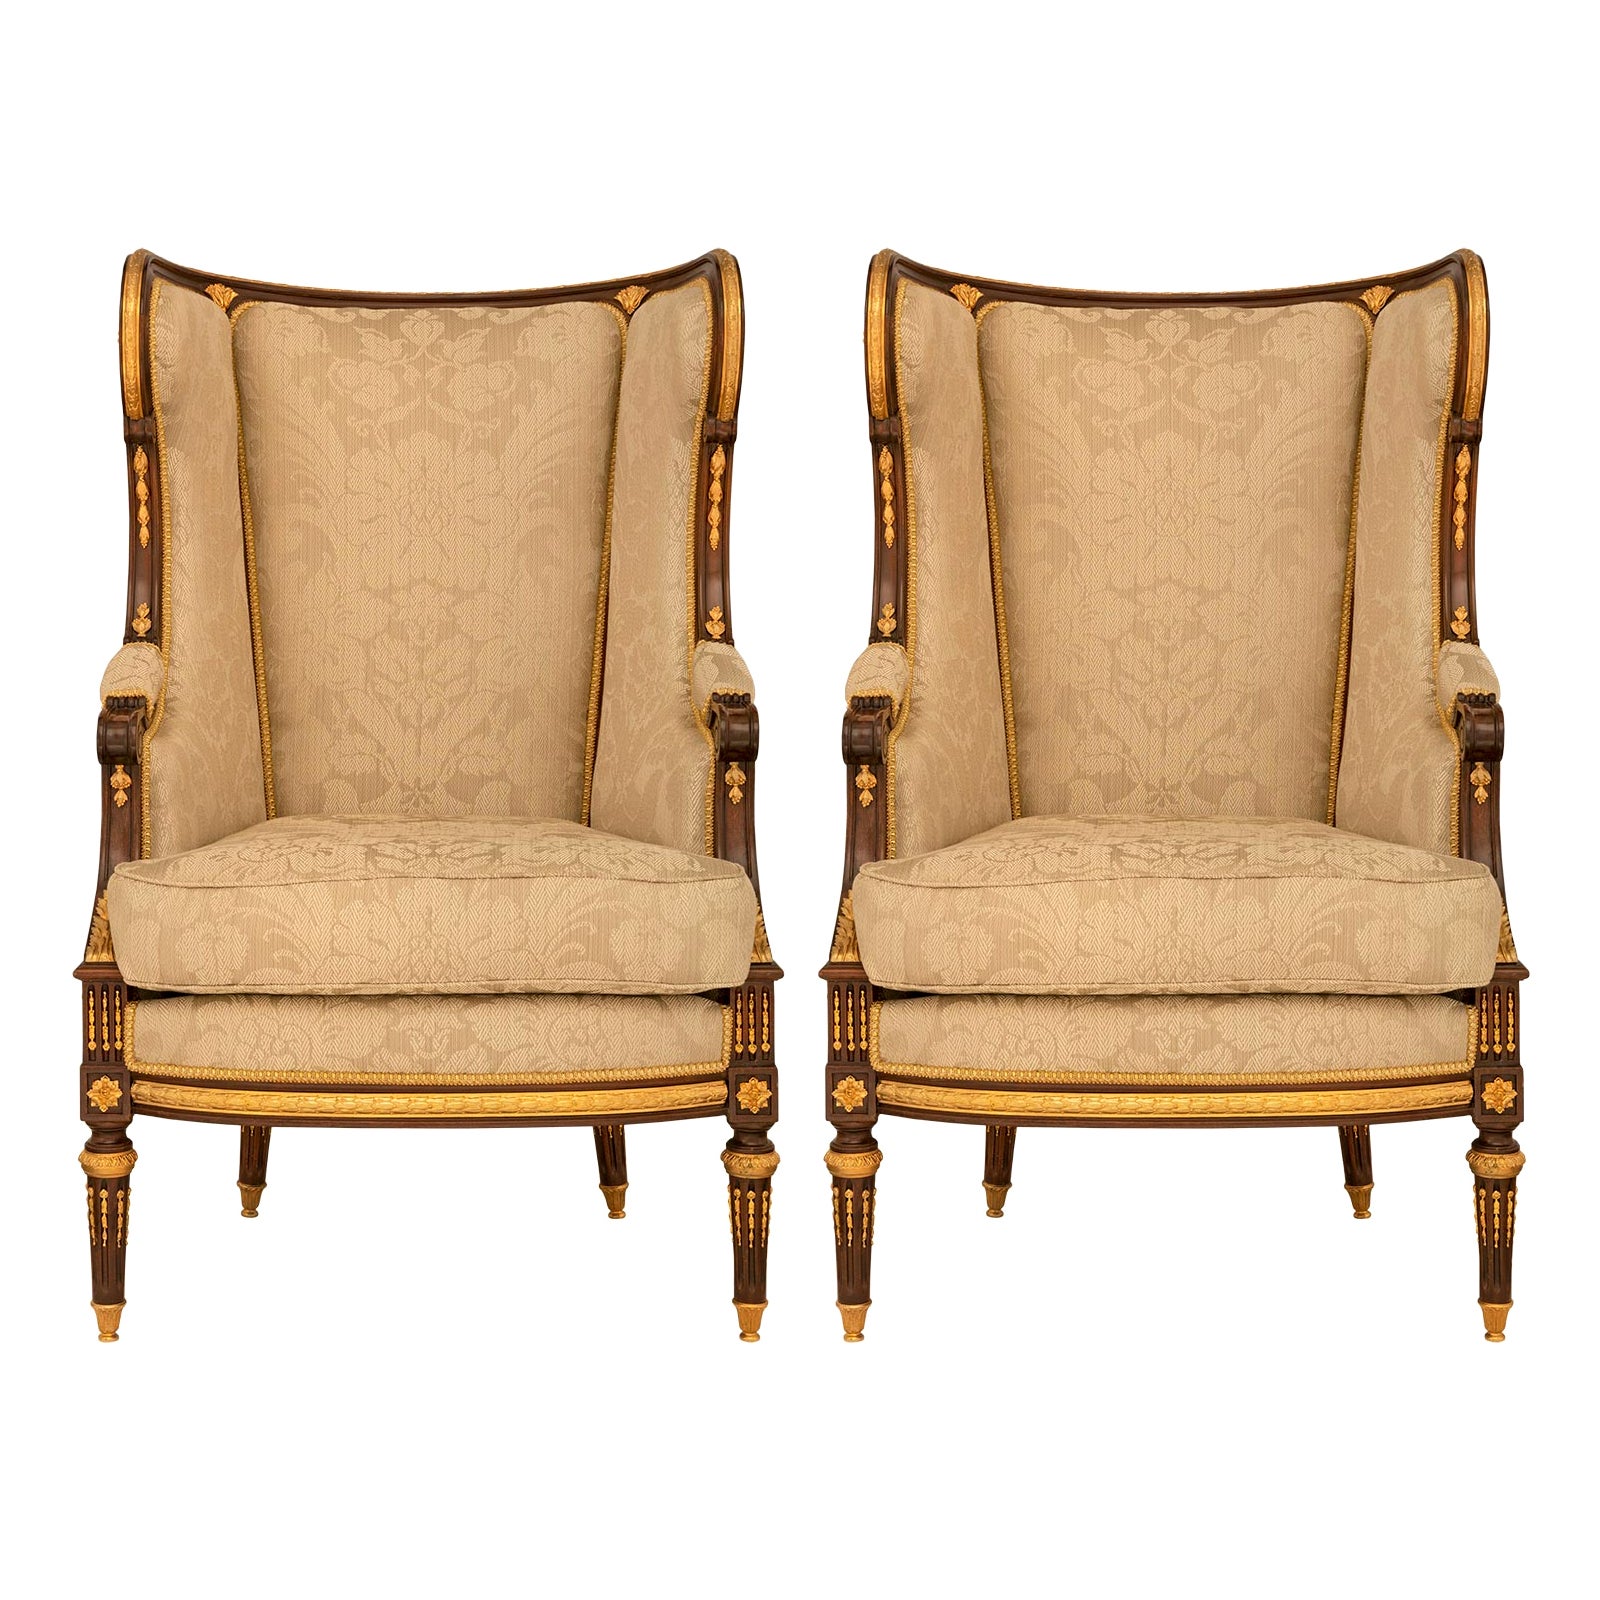 Pair of French 19th Century Belle Époque Period Mahogany & Ormolu Armchairs For Sale